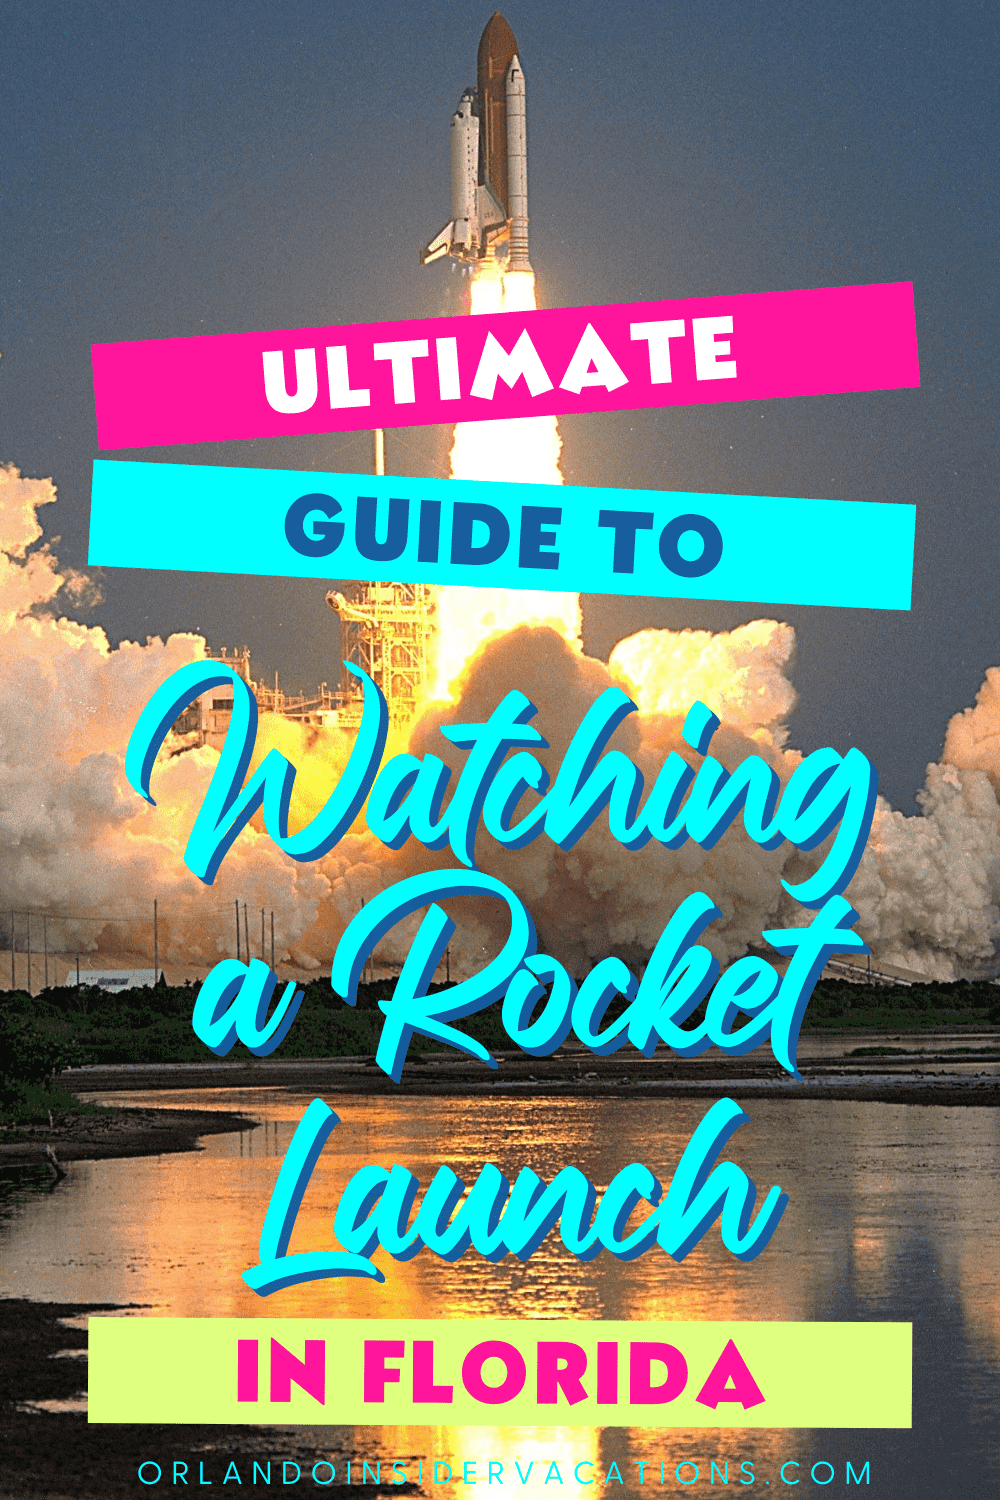 Where to Watch a Rocket Launch in Florida Link